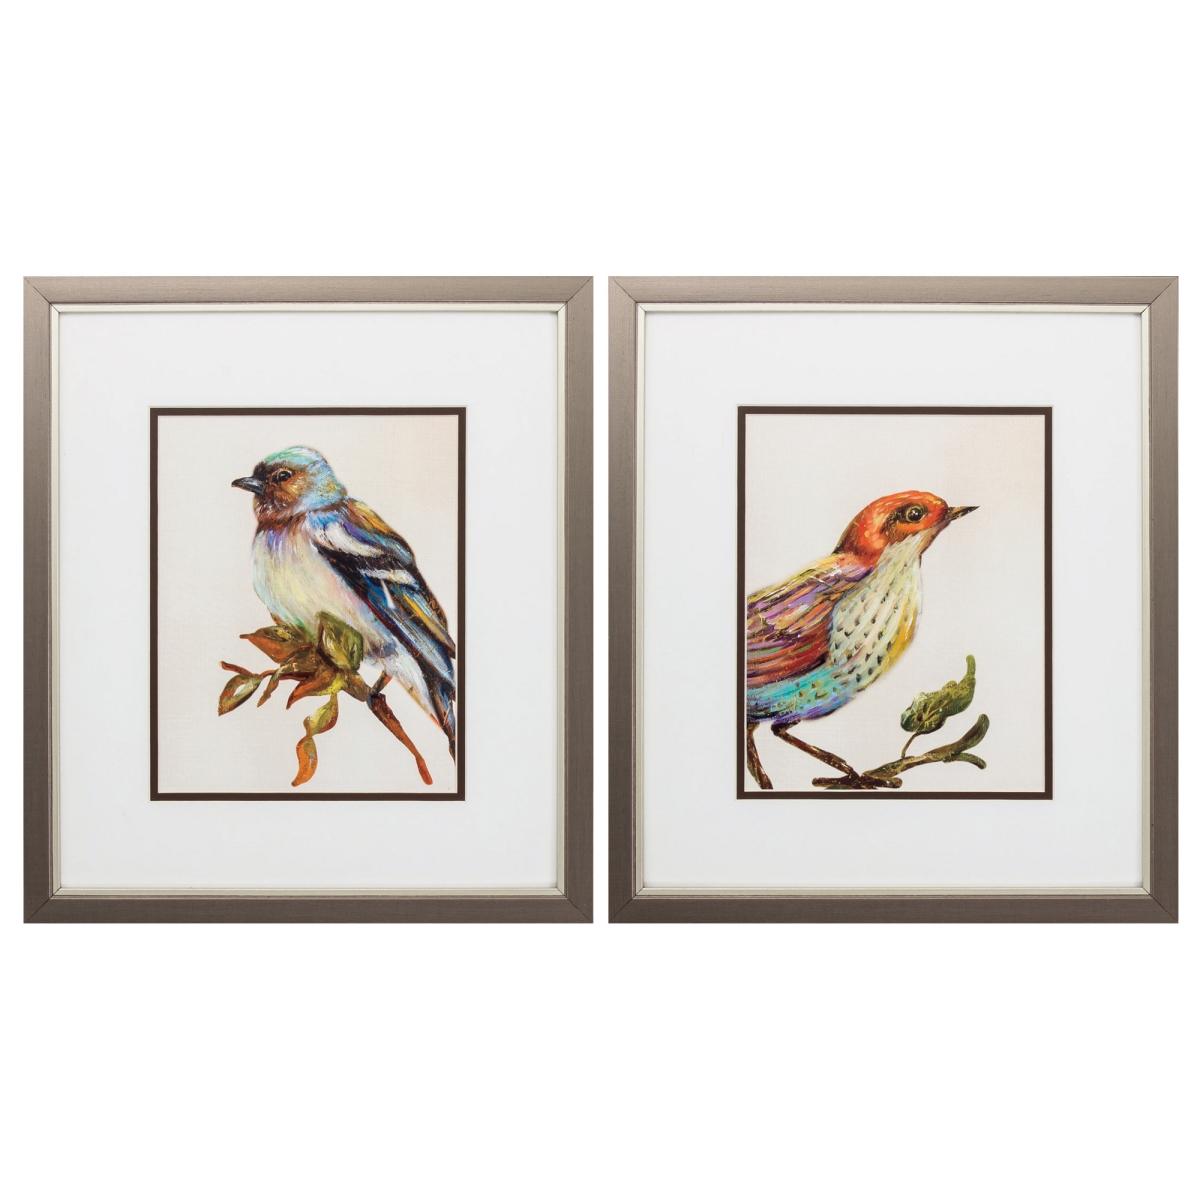 Propac Images 2024 Eco Bird Wall Art - Pack of 2